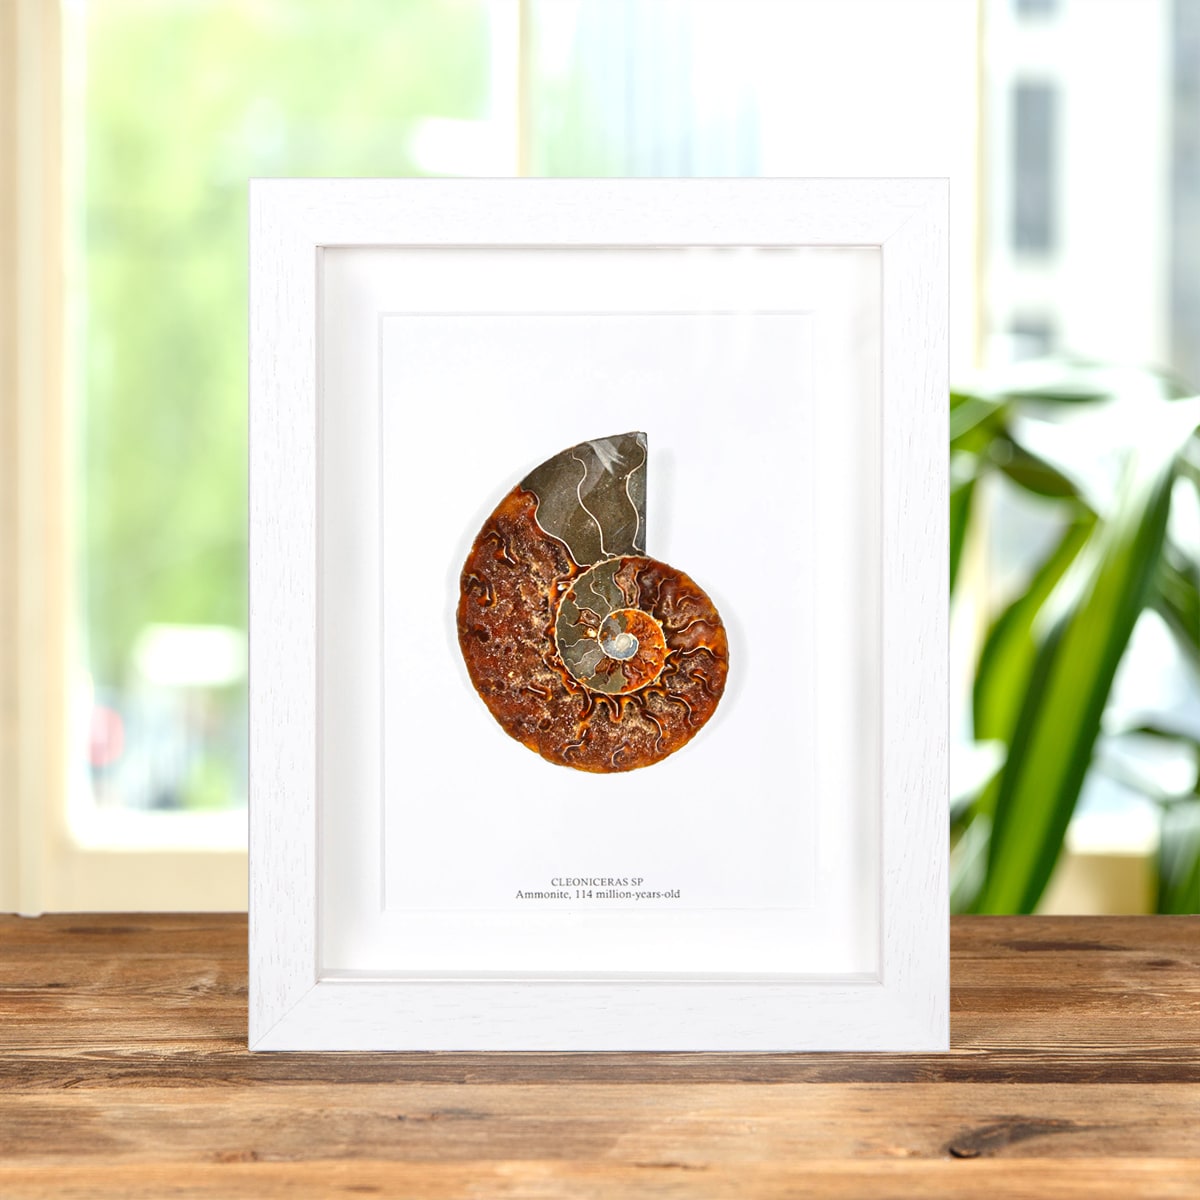 Large Ammonite Cut and Polished Fossil in Box Frame (Cleoniceras sp)